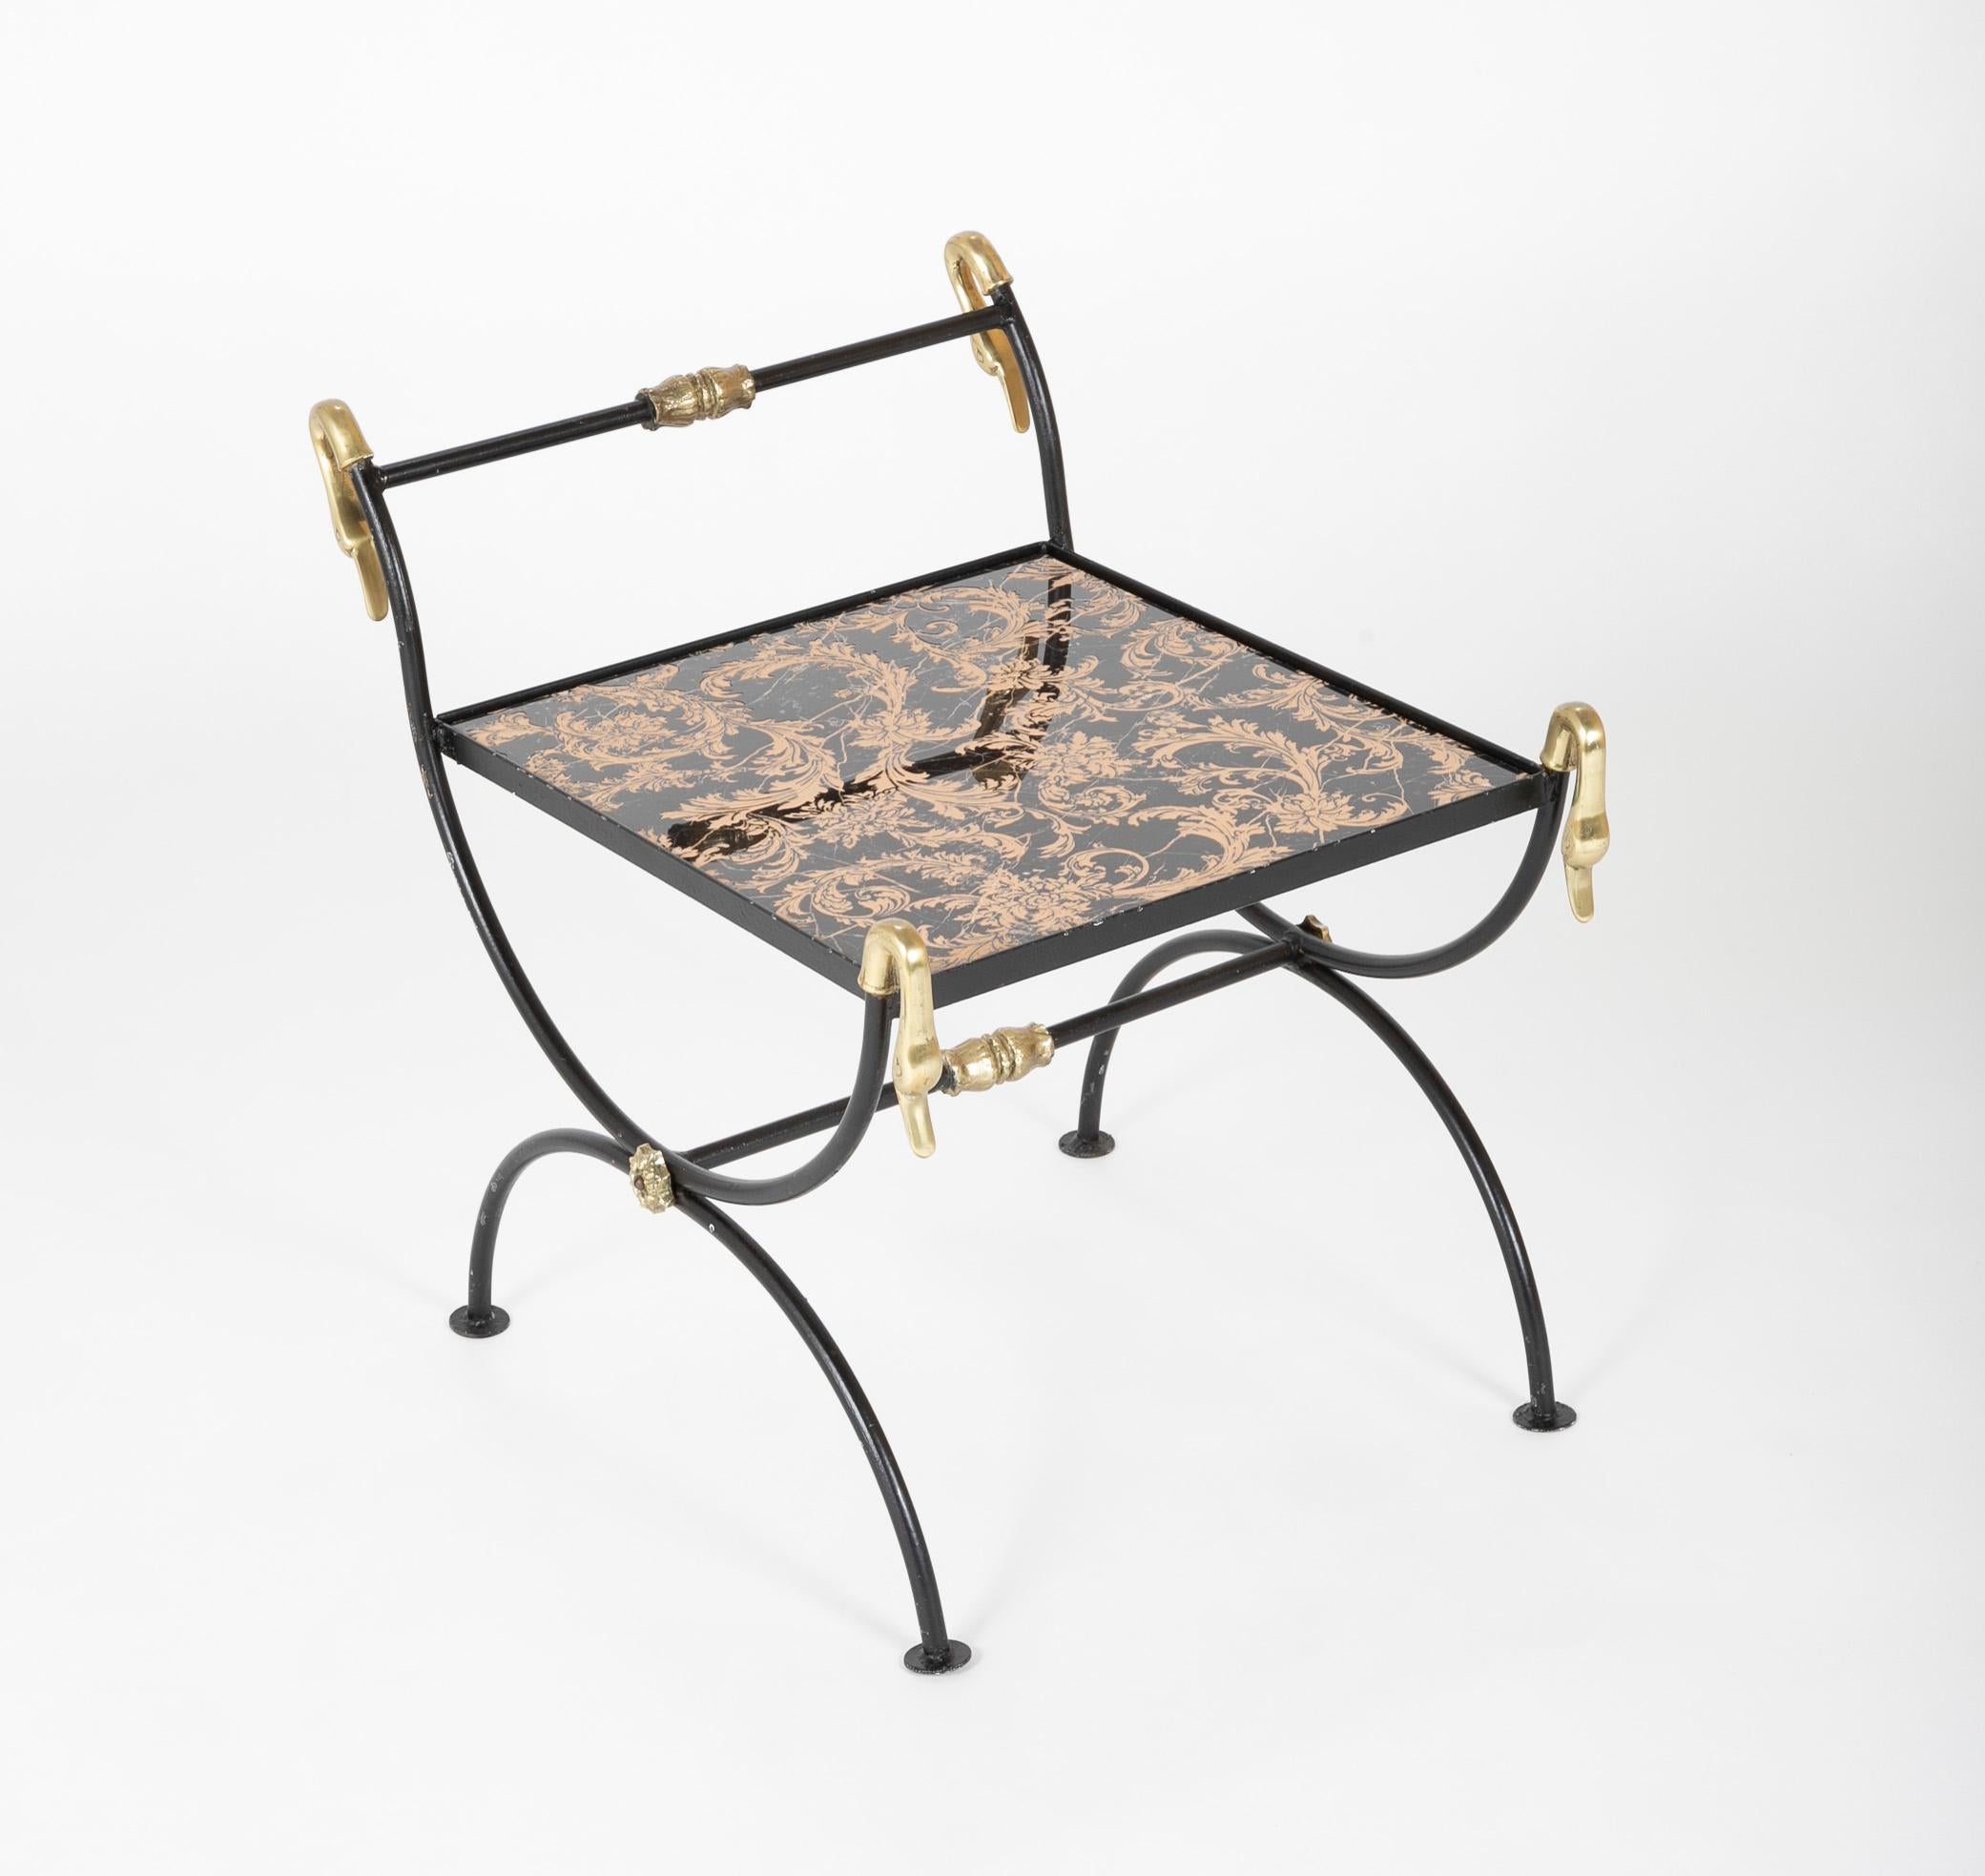 Three Piece Iron and Brass Coffee Table with Versace Insets 1